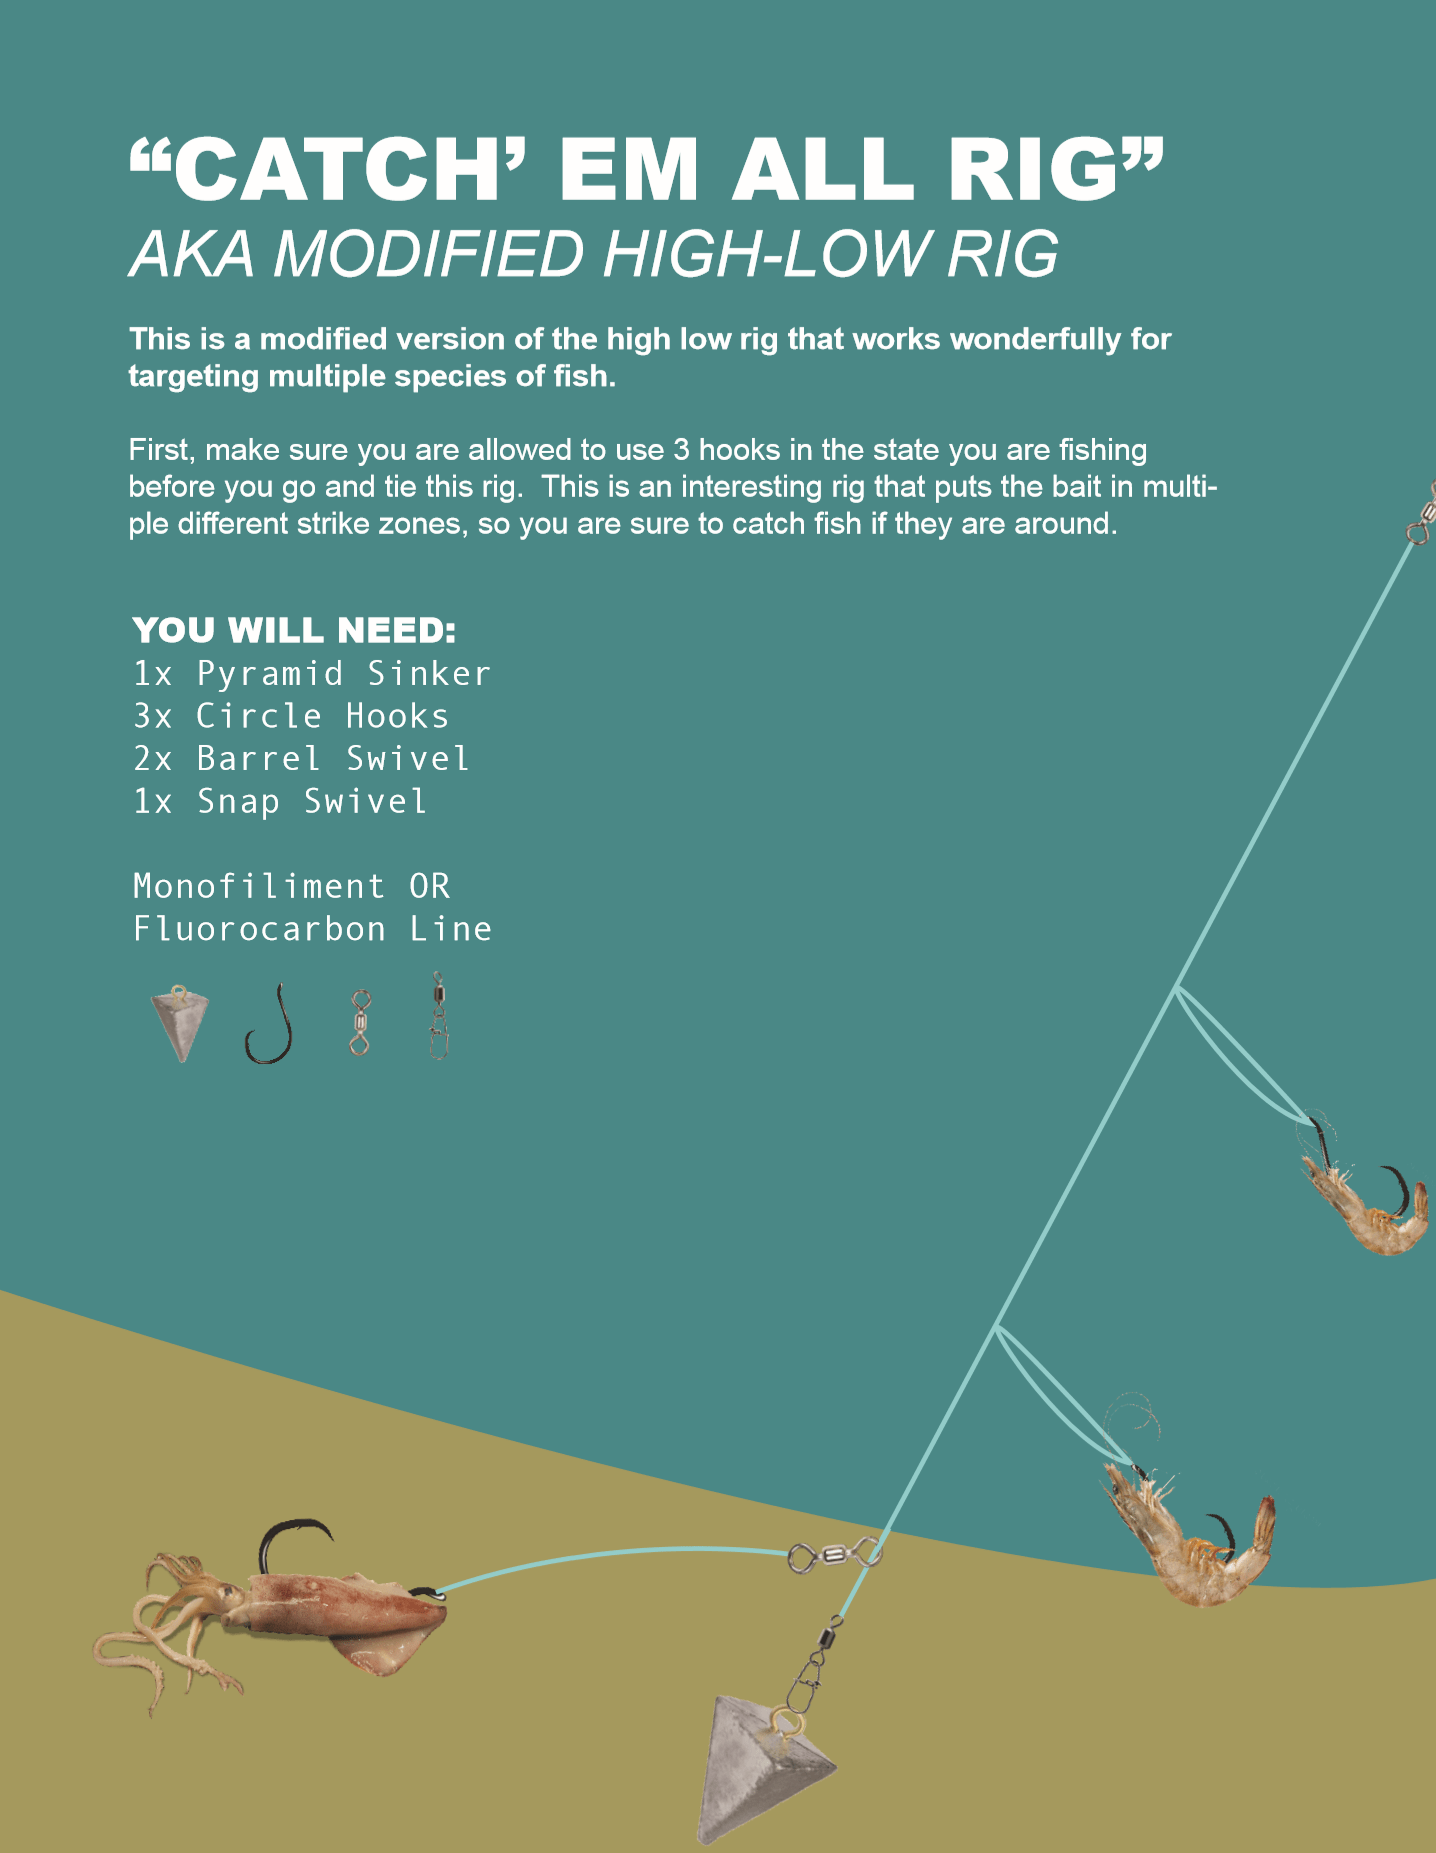 4 Basic Surf Rigs and How to Tie Them (15 page Ebook) - Hey Skipper